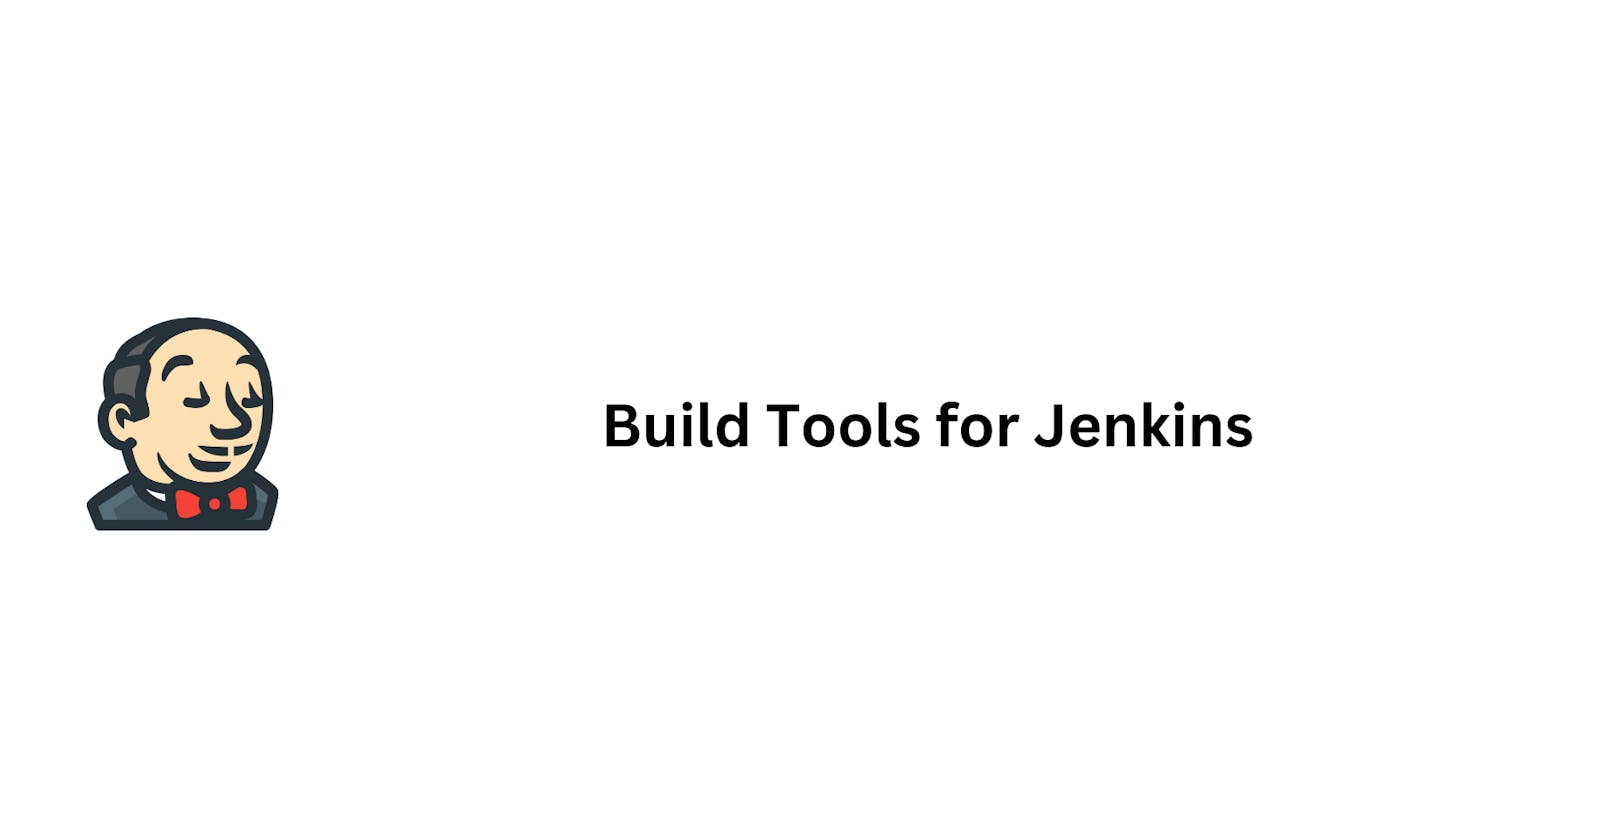 Build Tools for Jenkins